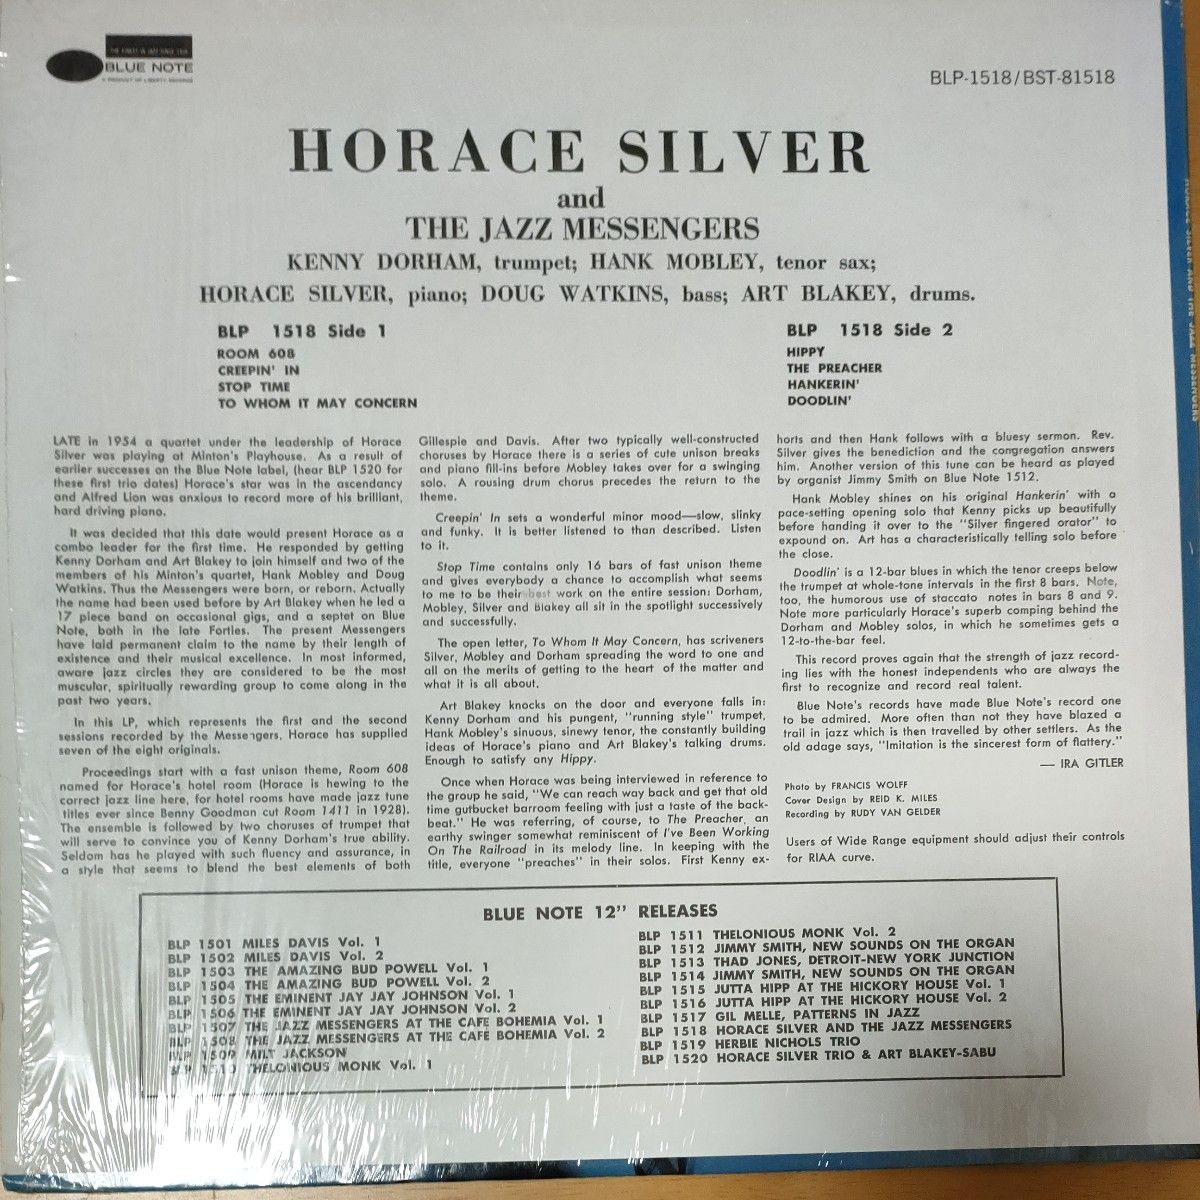 HORACE SILVER AND THE JAZZ MESSENGERS/HORACE SILVER